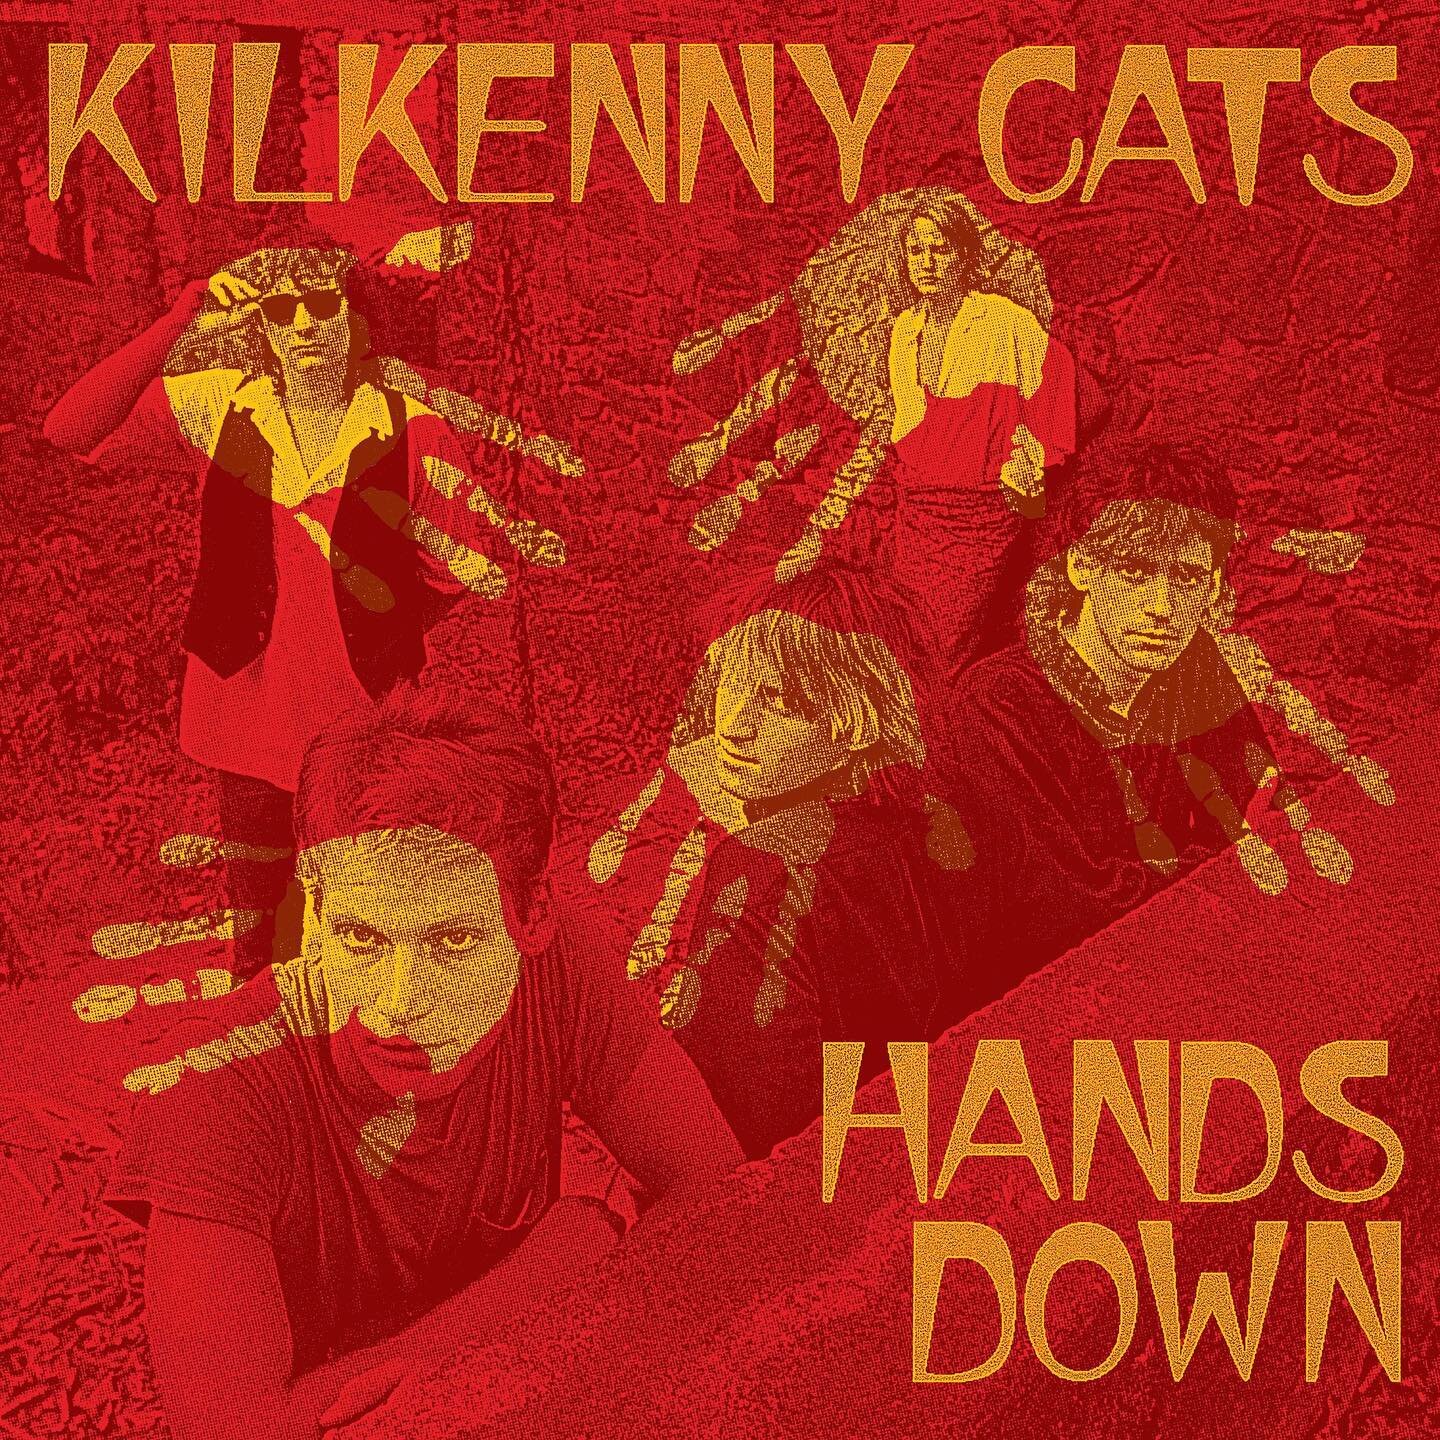 Request copy from @xoestey @kilkennycatsathens #music
.
.
.

Kilkenny Cats formed in early 1983 in Athens, GA, a new project from members of art-rock band Is/Ought Gap. Its founding members were Tom Cheek (vocals), Haynes Collins (bass), Sean O&rsquo